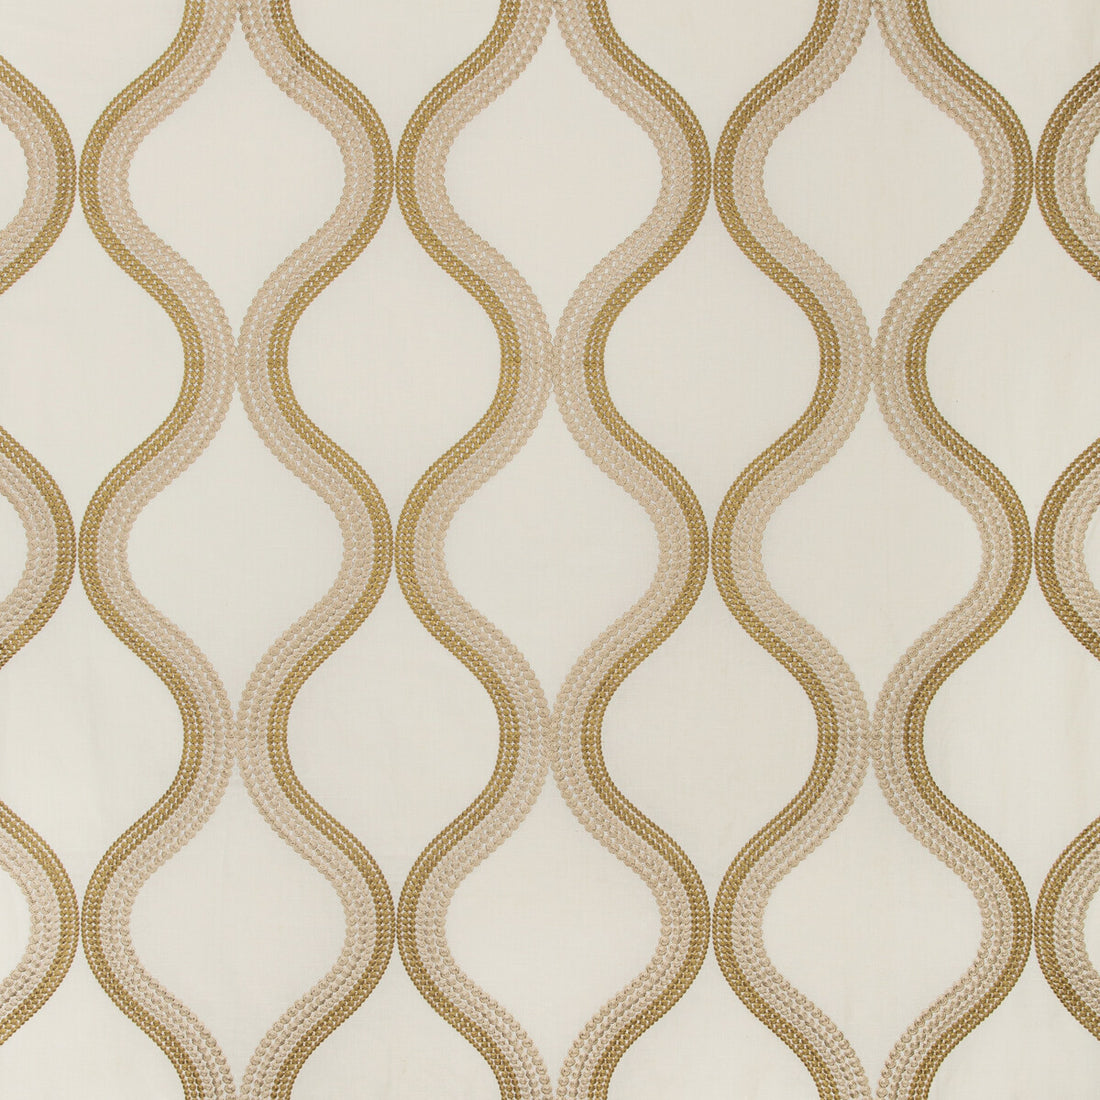 Wandering fabric in ivory/gold color - pattern 35553.1416.0 - by Kravet Couture in the Modern Colors-Sojourn Collection collection